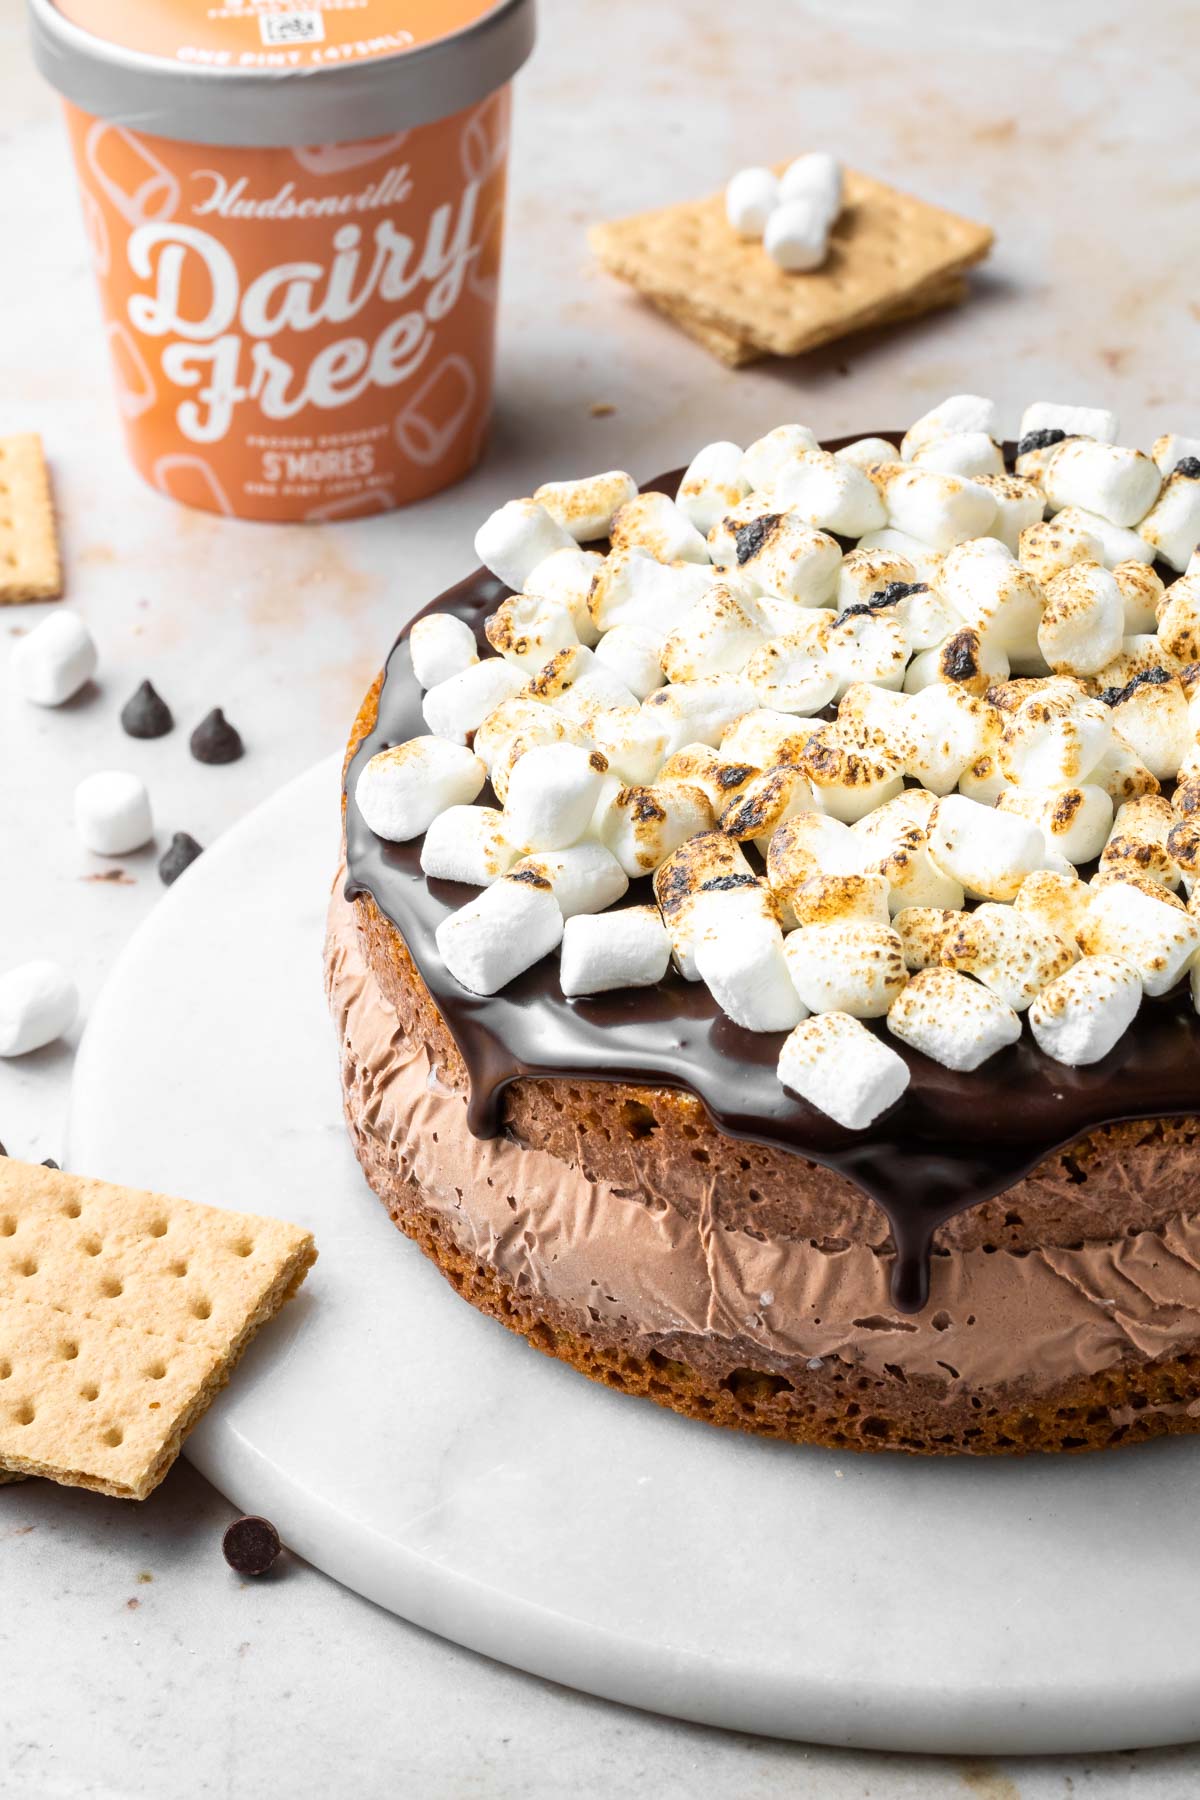 dairy free s'mores ice cream graham cracker cake topped with toasted marshmallows and hot fudge sauce